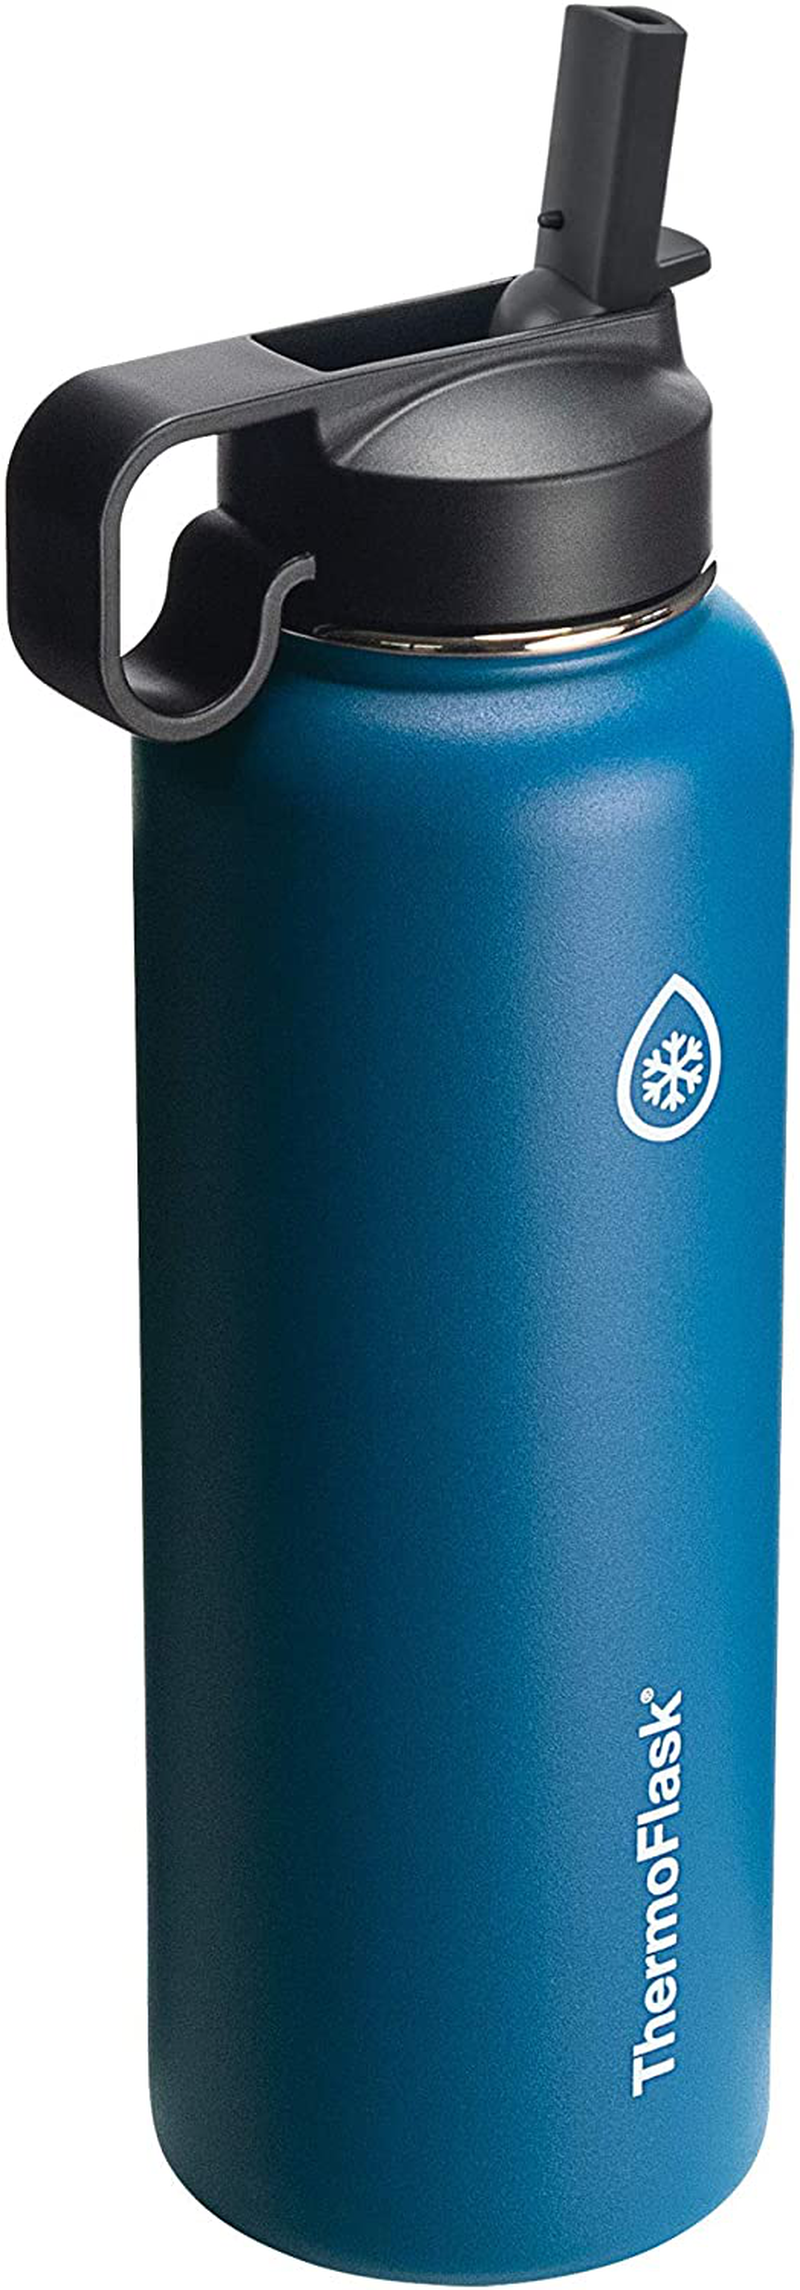 Thermoflask Double Stainless Steel Insulated Water Bottle, 40 oz, Cobalt